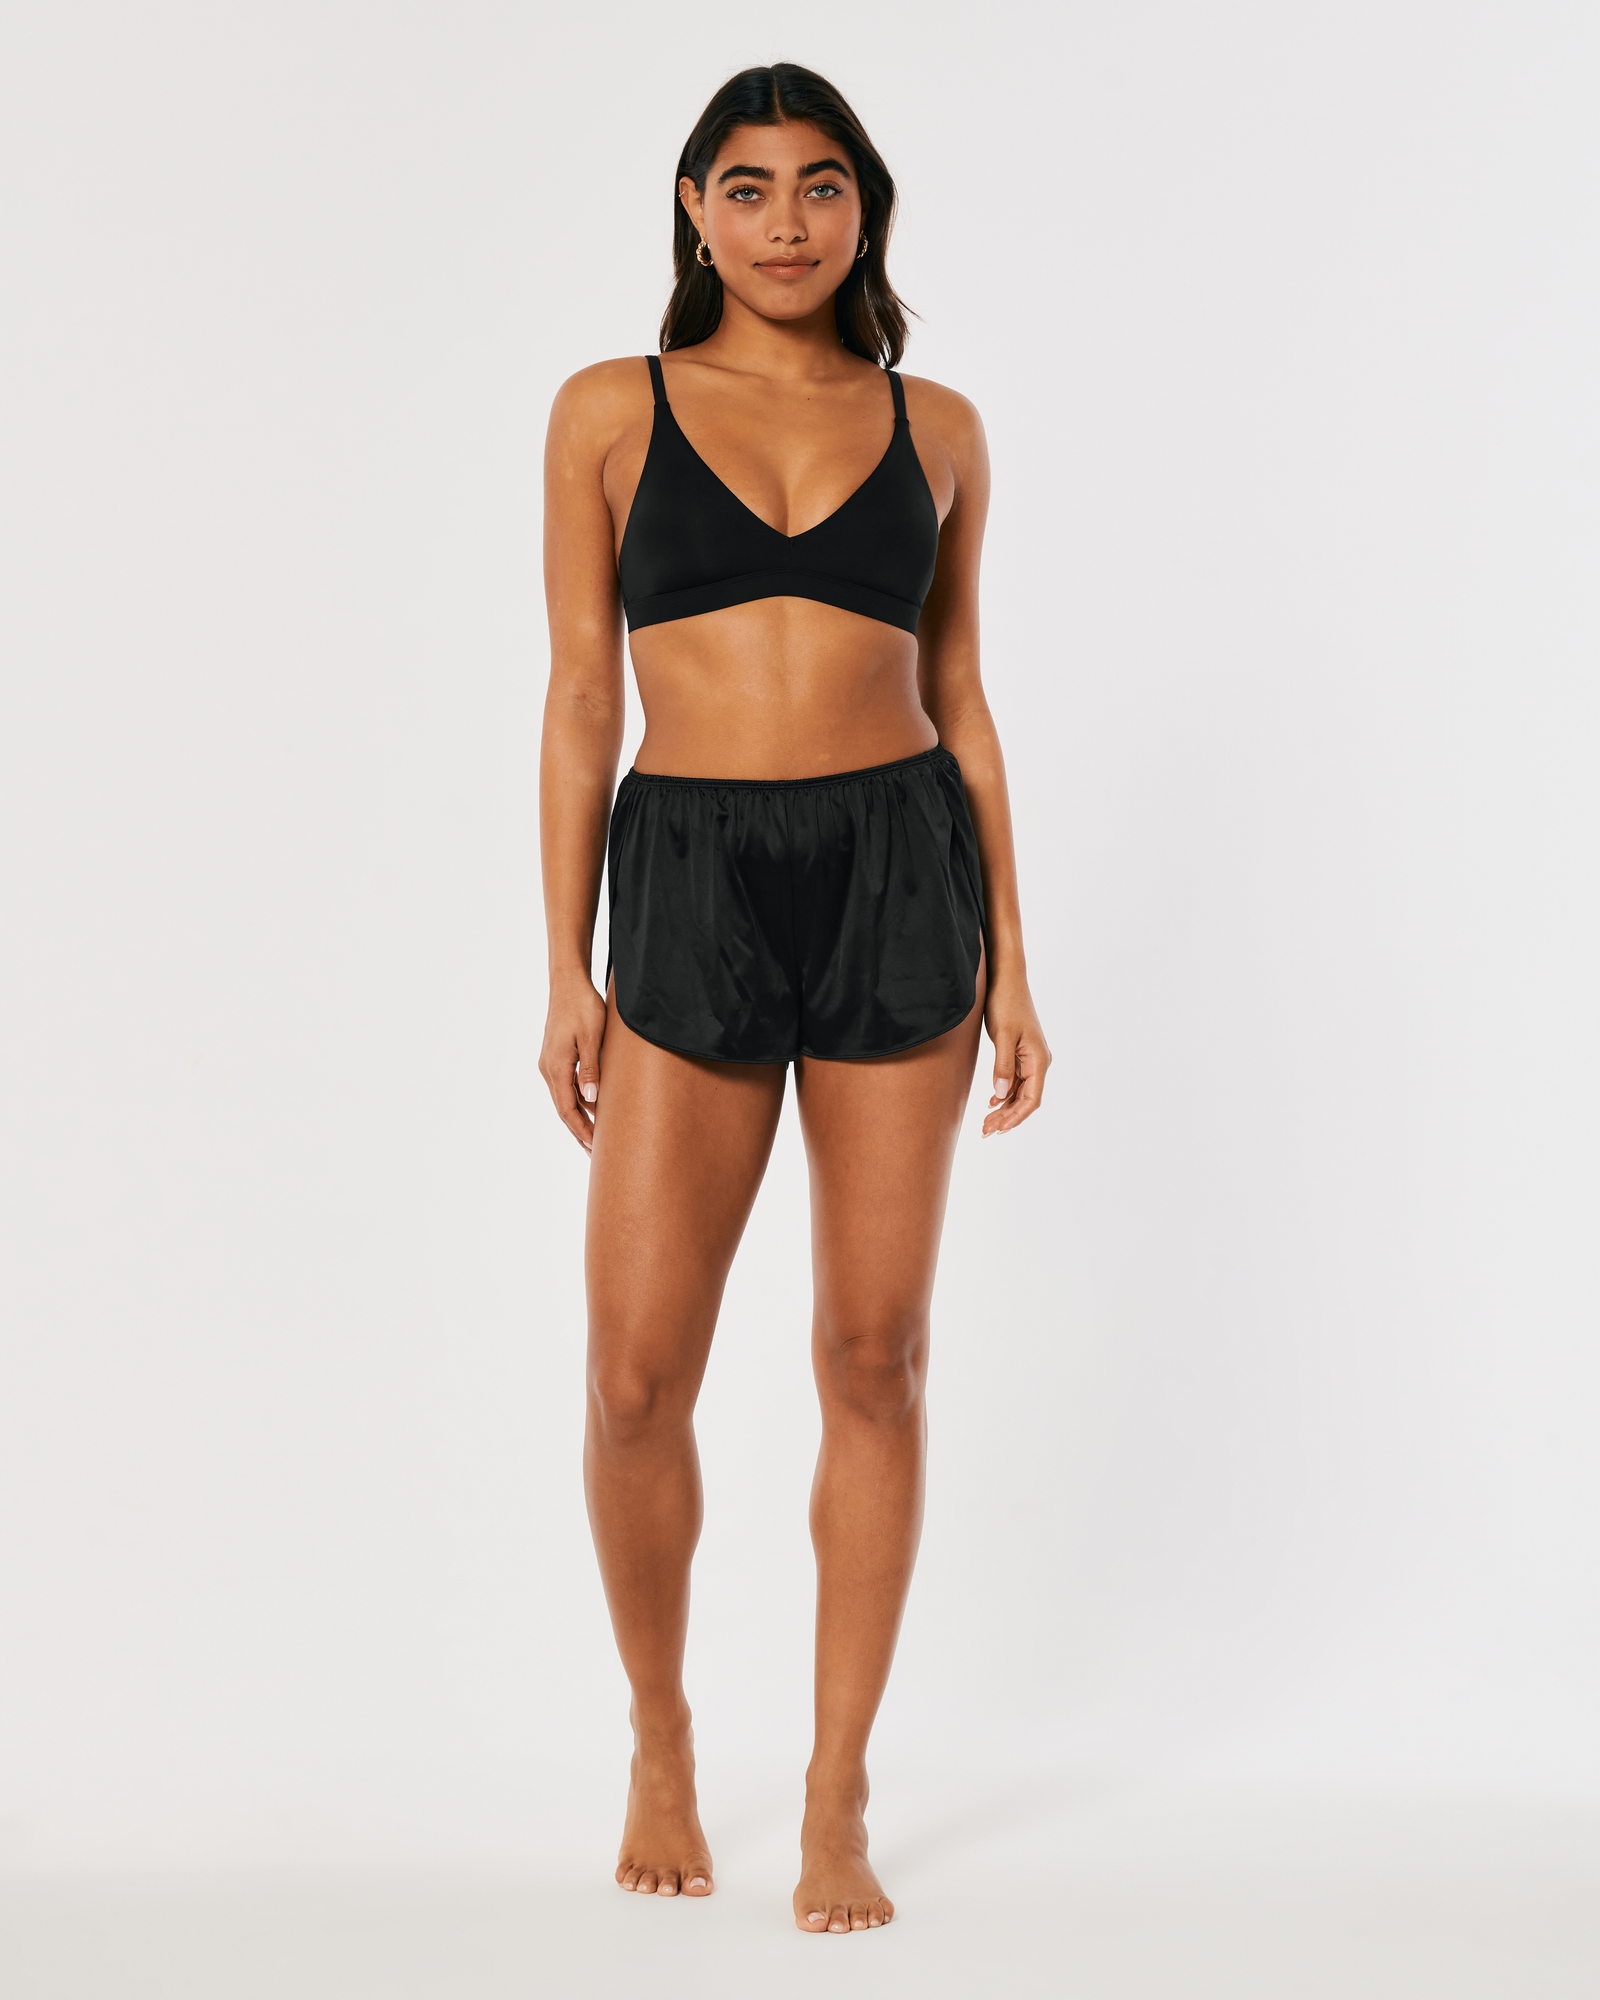 Women's Gilly Hicks Micro Triangle Bralette